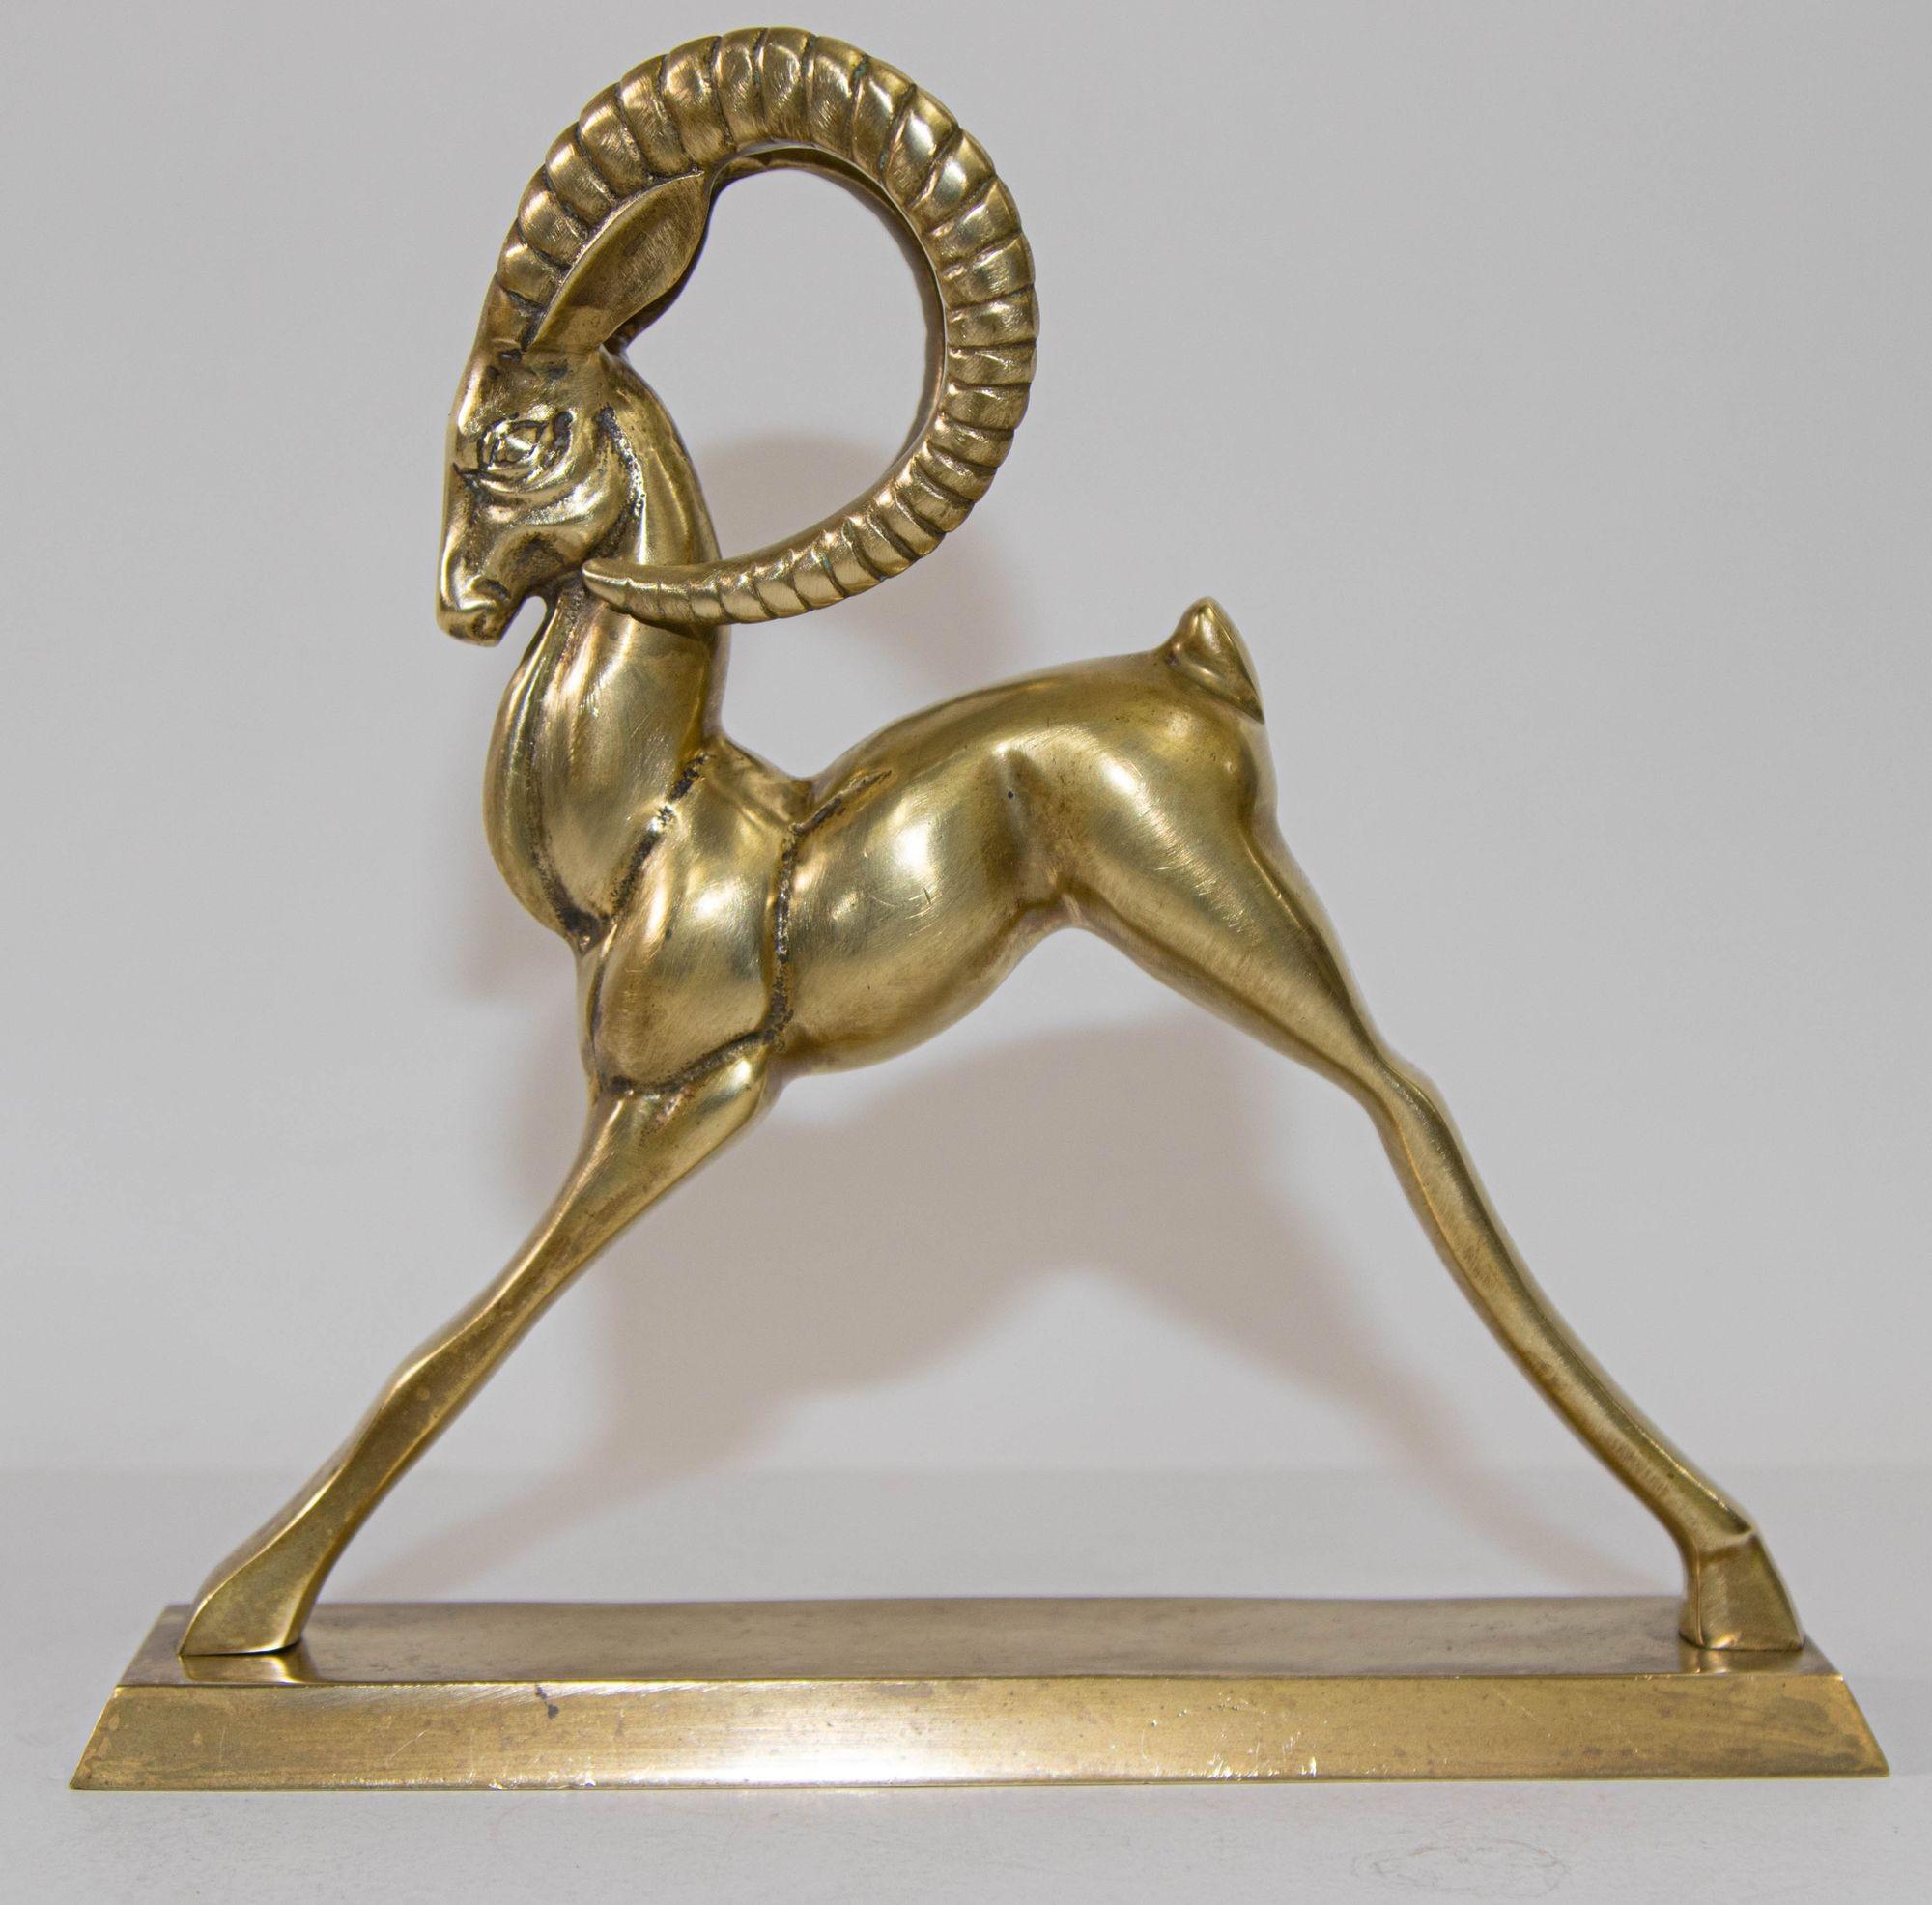 Vintage French Art Deco Style Sculpture of Brass Ibex Antelope 4